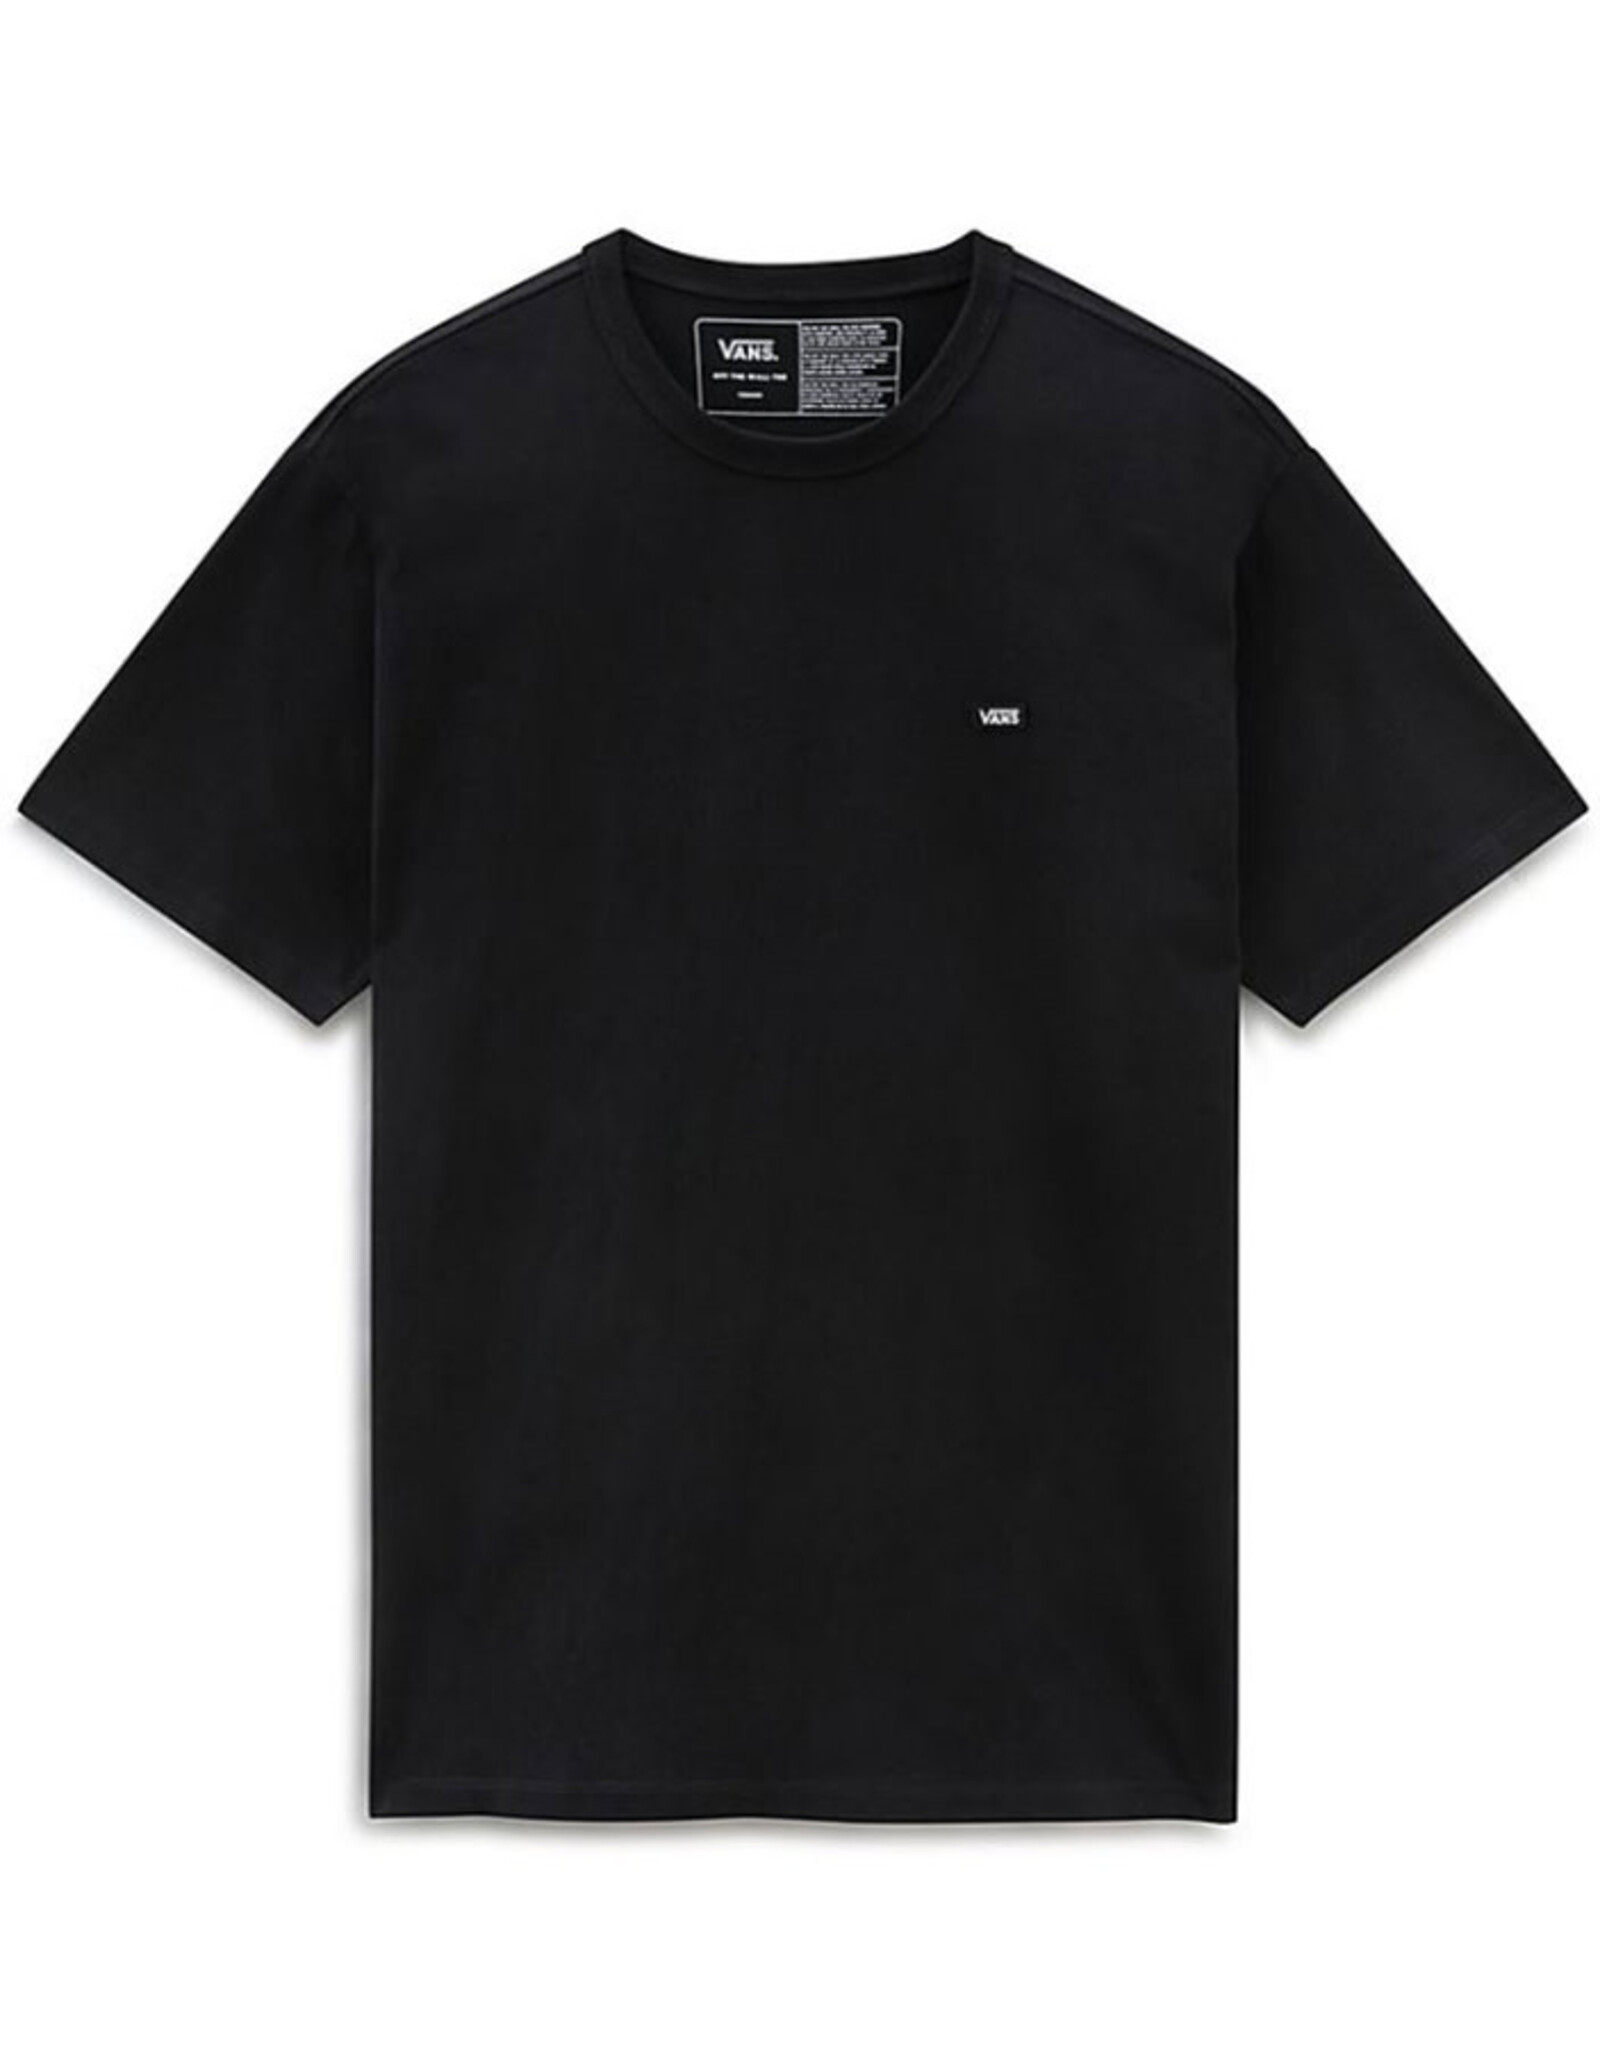 OFF THE WALL CLASSIC T-SHIRT SHORT SLEEVE BLACK - VN0A49R7BLK